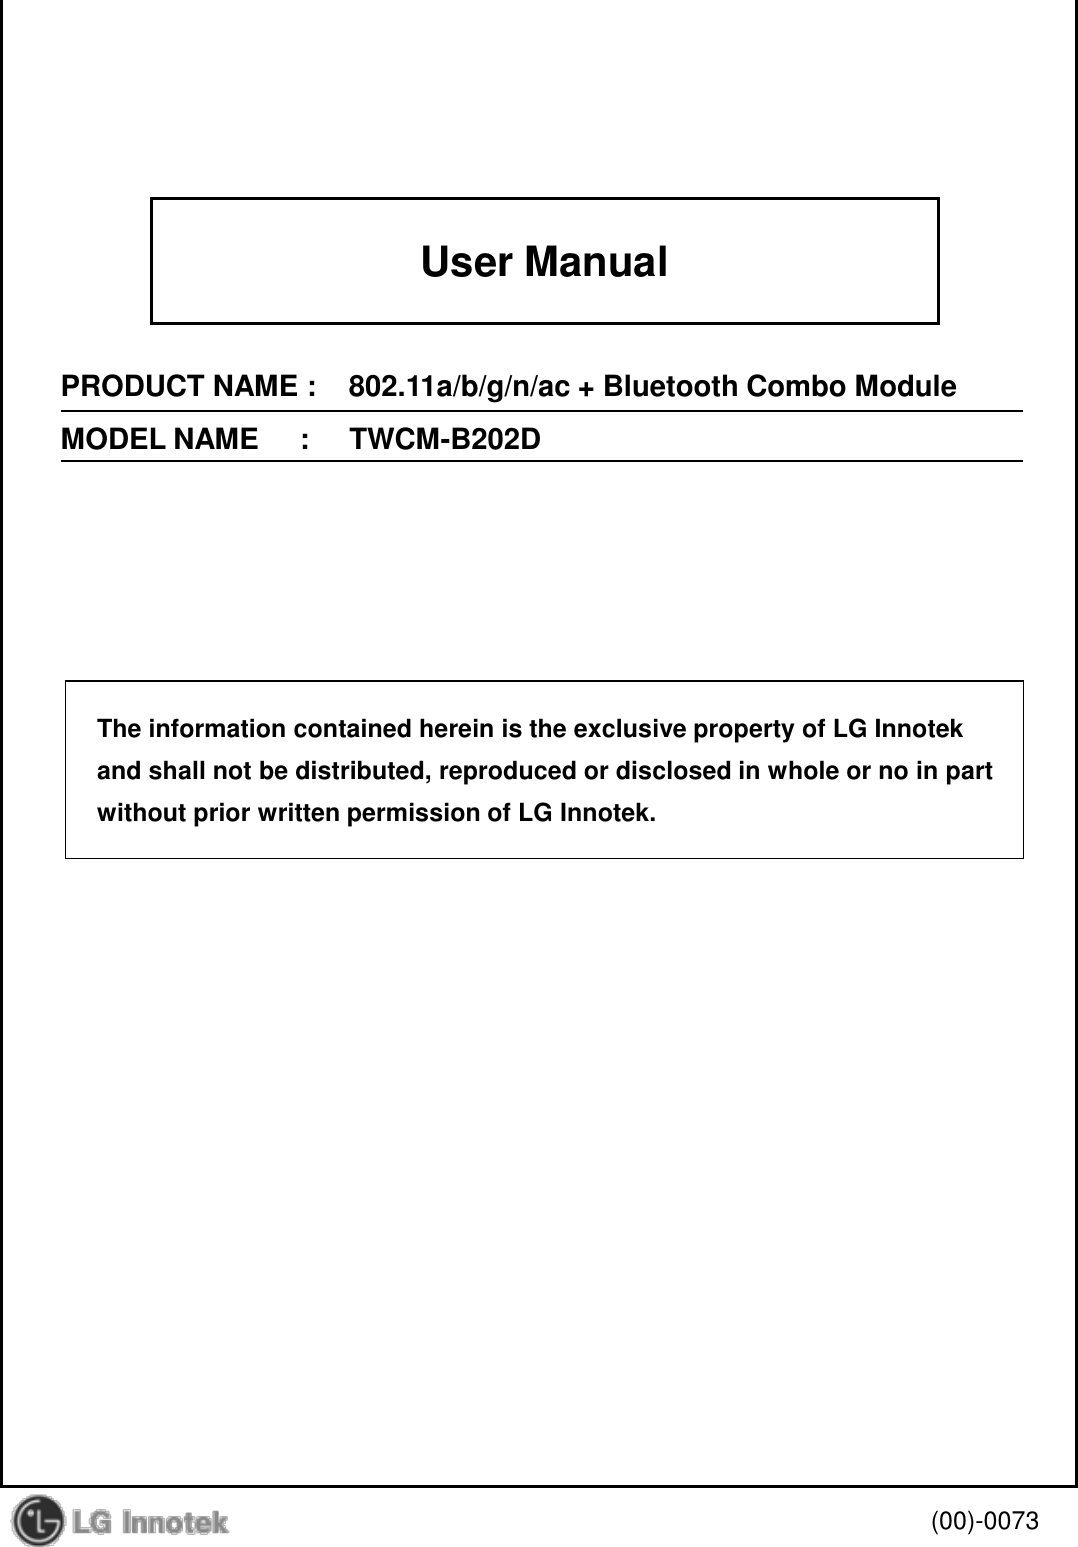 User ManualPRODUCT NAME :    802.11a/b/g/n/ac + Bluetooth Combo ModuleMODEL NAME     :     TWCM-B202D(00)-0073The information contained herein is the exclusive property of LG Innotekand shall not be distributed, reproduced or disclosed in whole or no in partwithout prior written permission of LG Innotek.